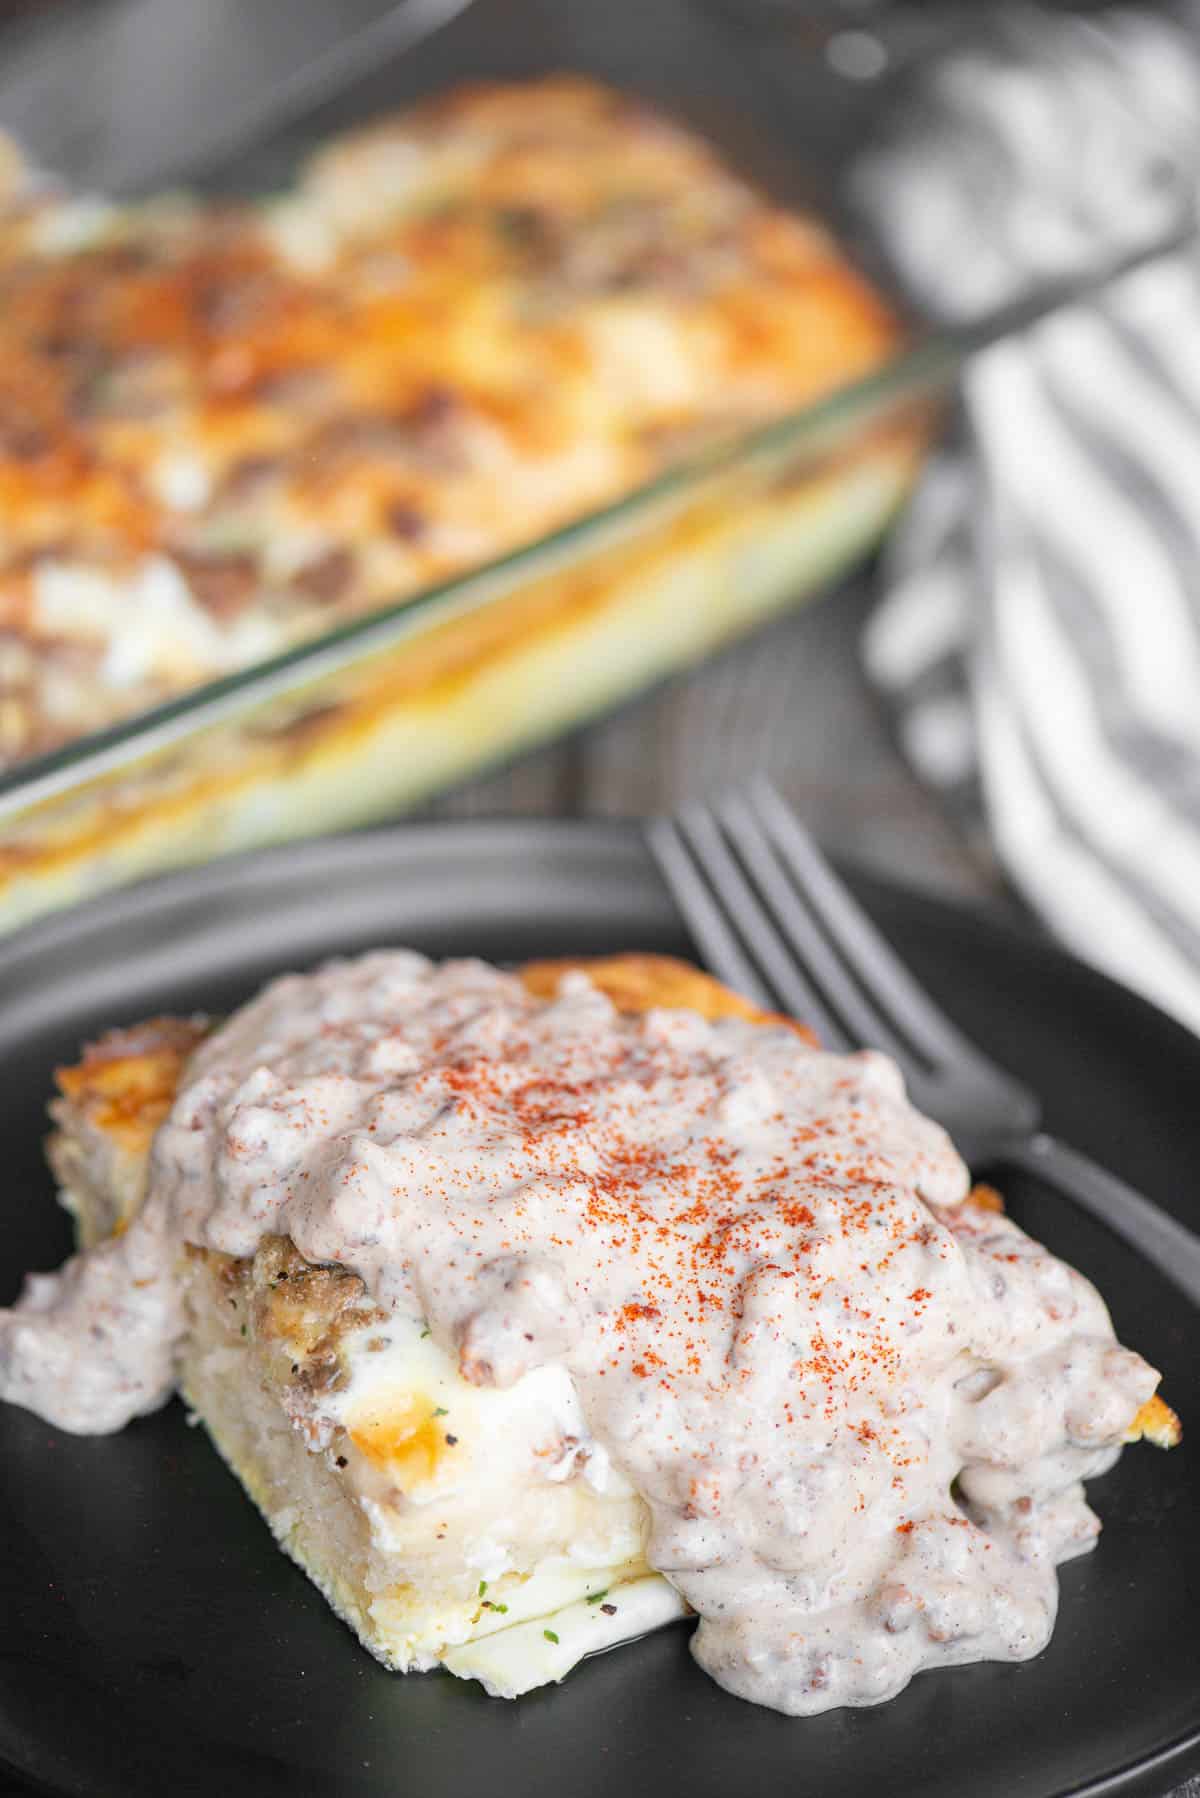 biscuits and gravy casserole.